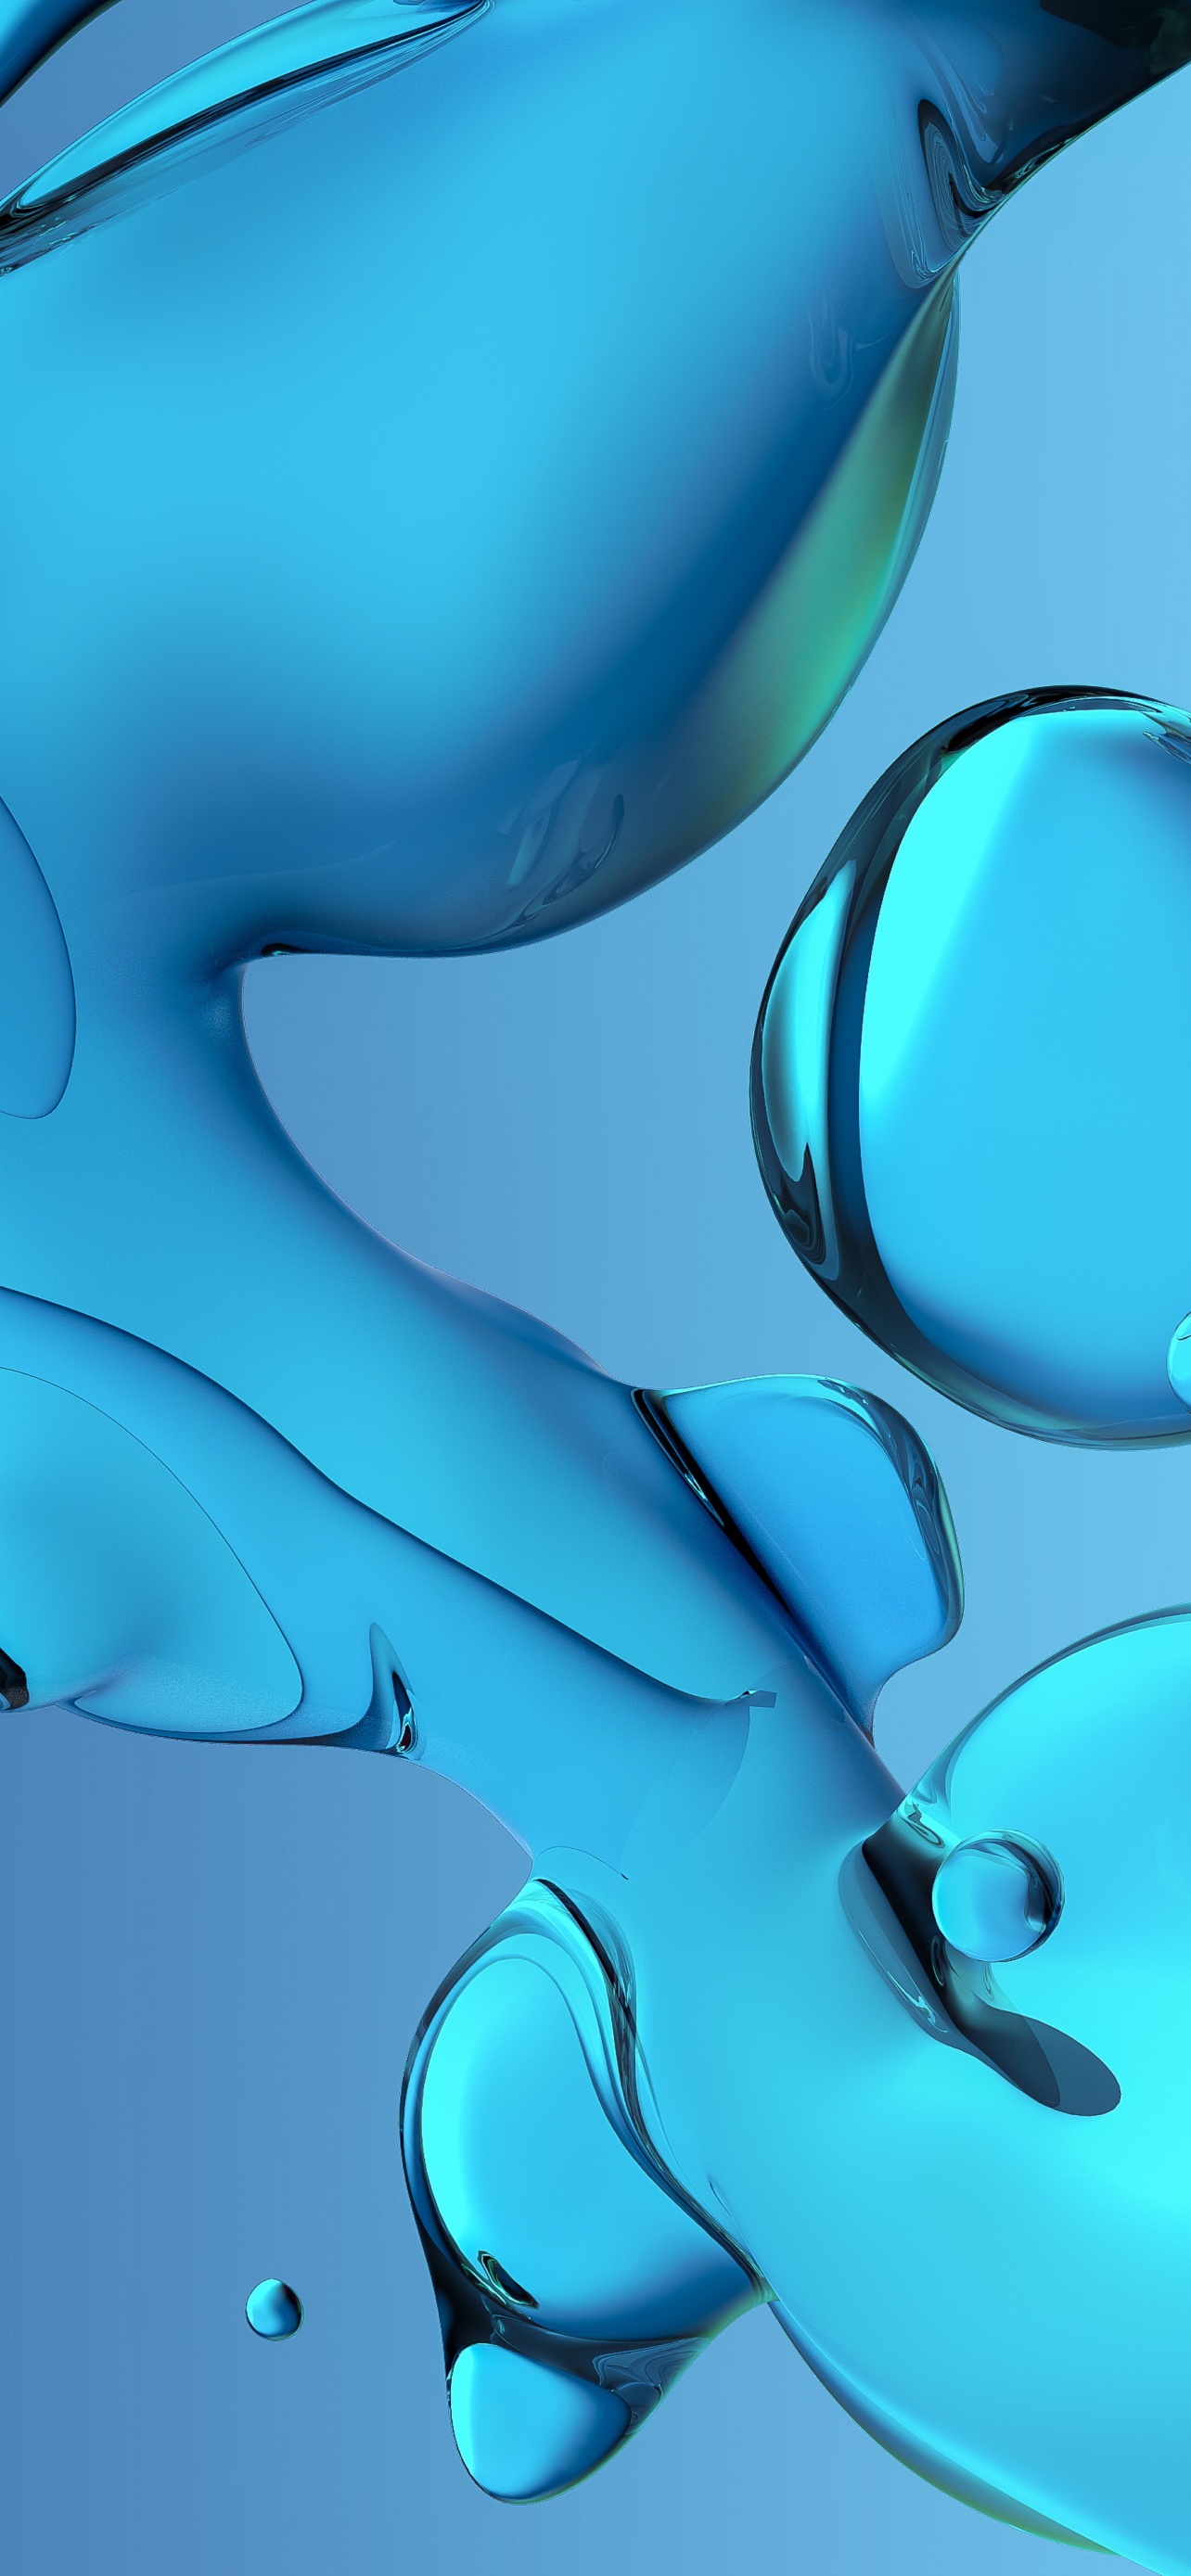 Fluidic Wallpaper 4K, Glossy, Abstract, #7625